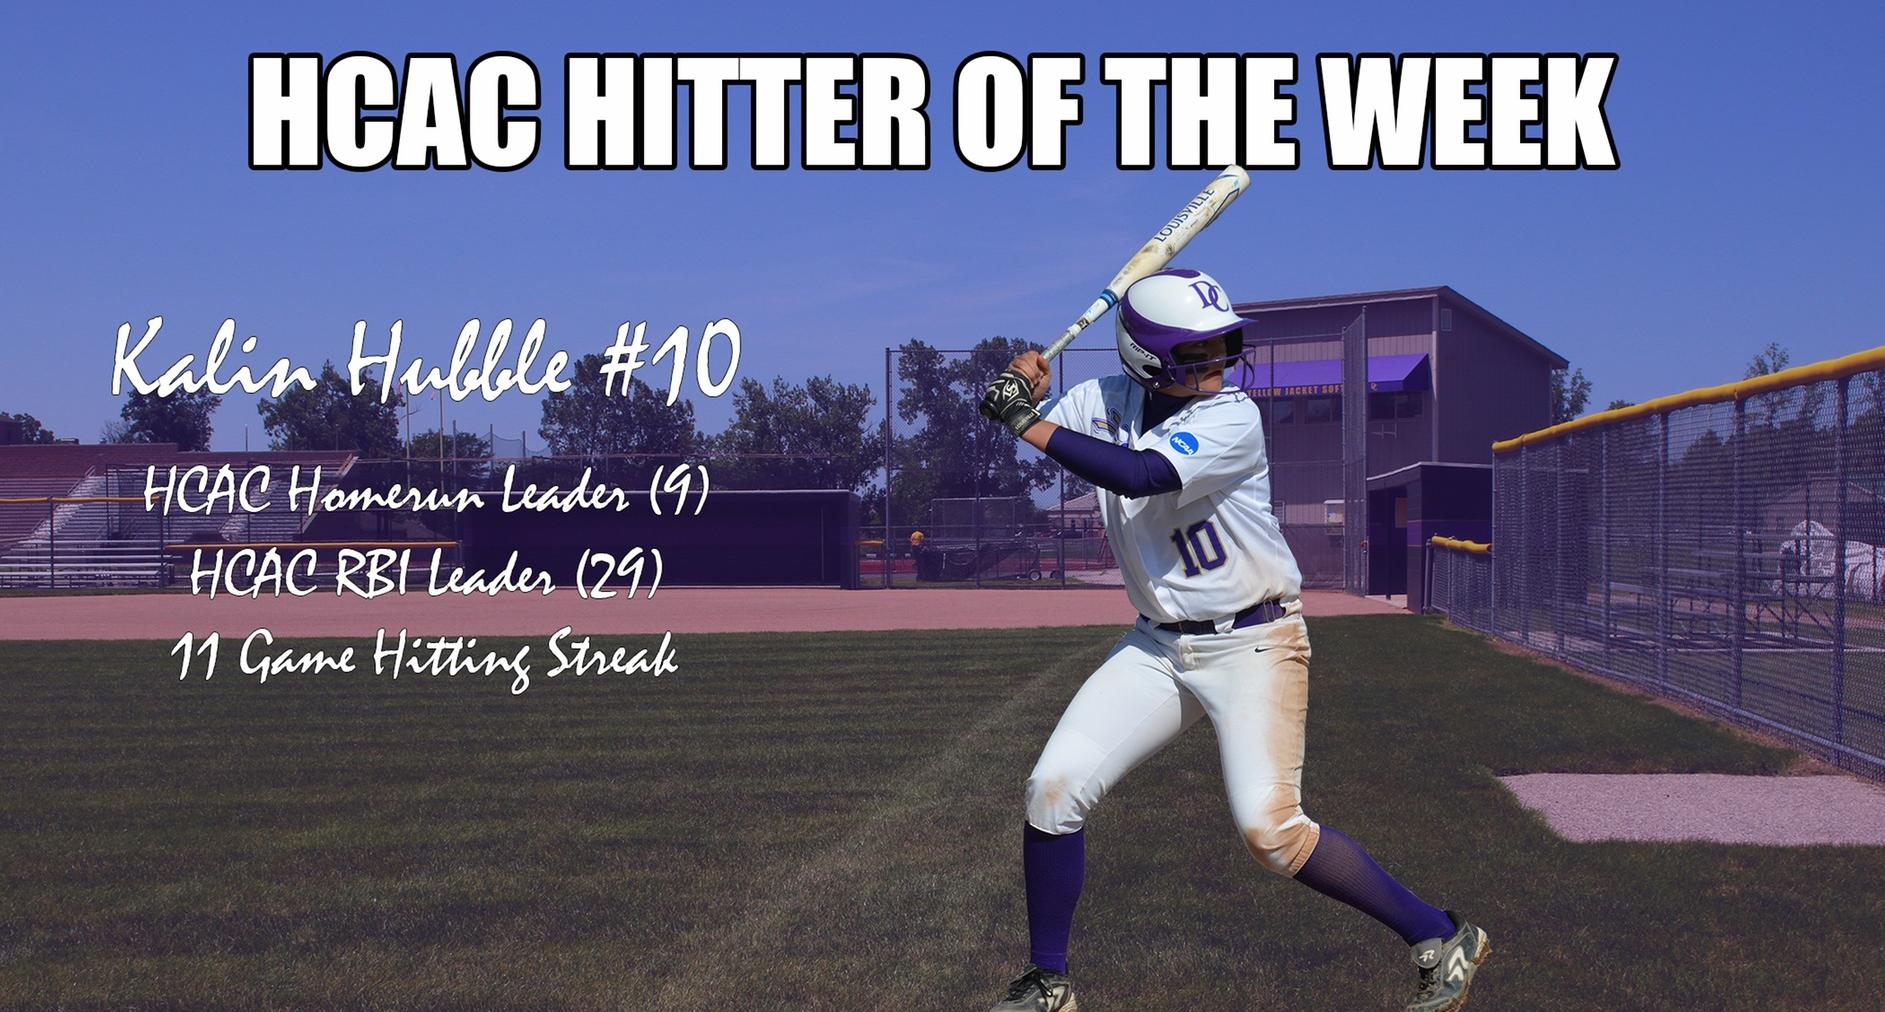 Hubble Caps Impressive Week with HCAC Top Hitter Honors